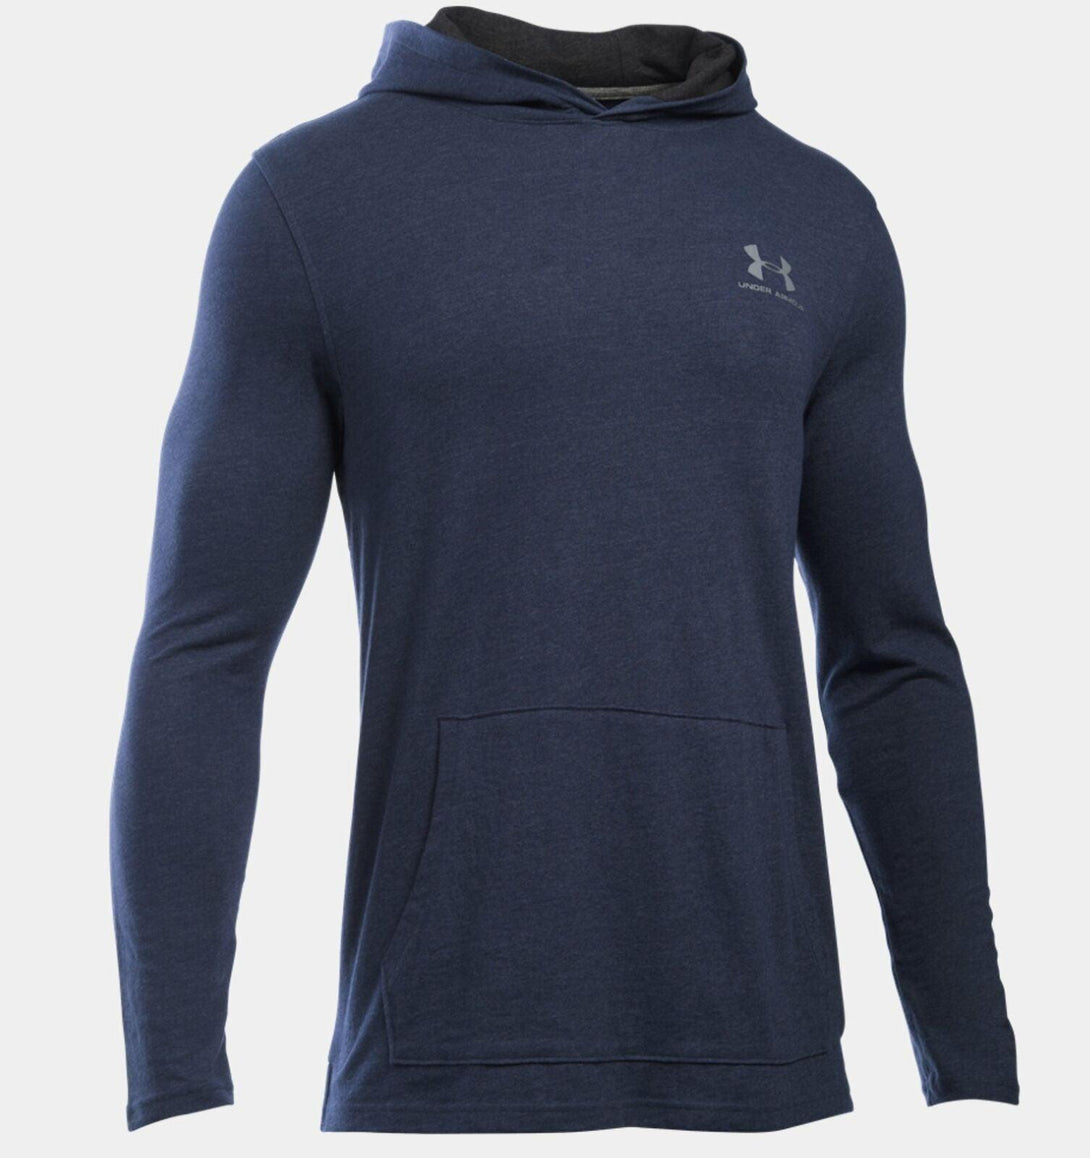 Rugby Heaven Under Armour Mens Triblend L/S Shirt - www.rugby-heaven.co.uk